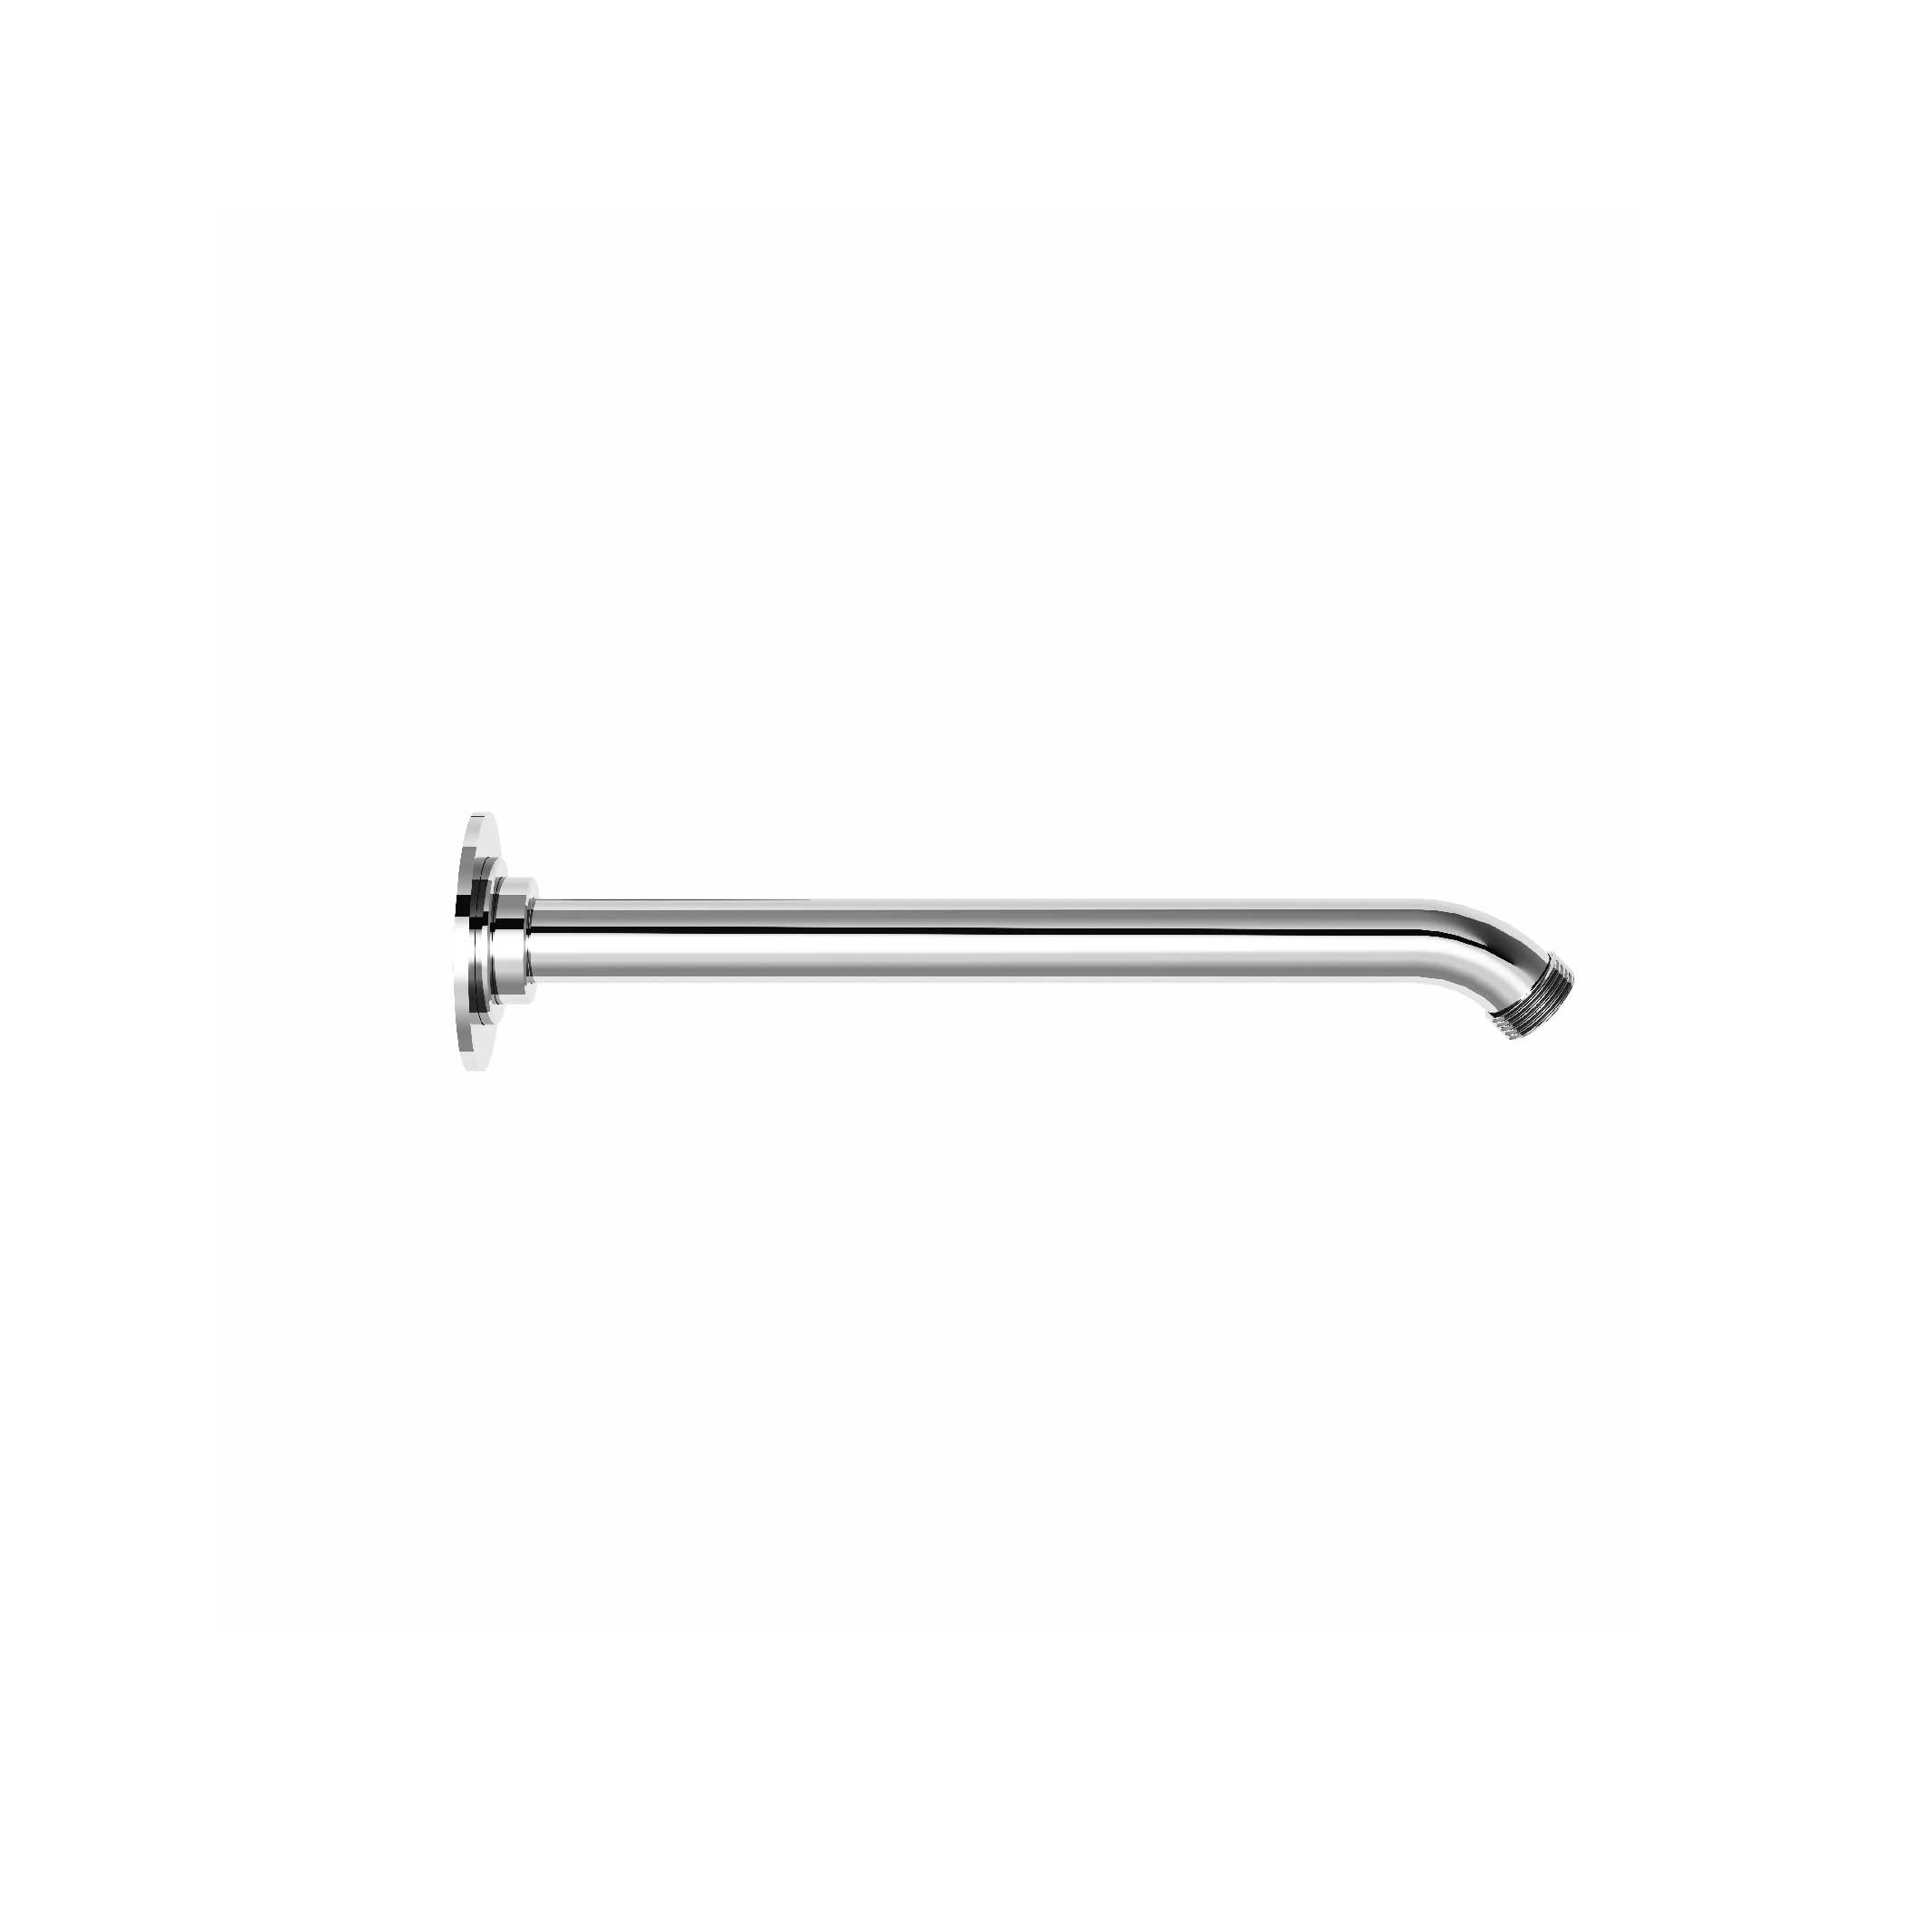 M32-2W170 Wall mounted shower arm 170mm